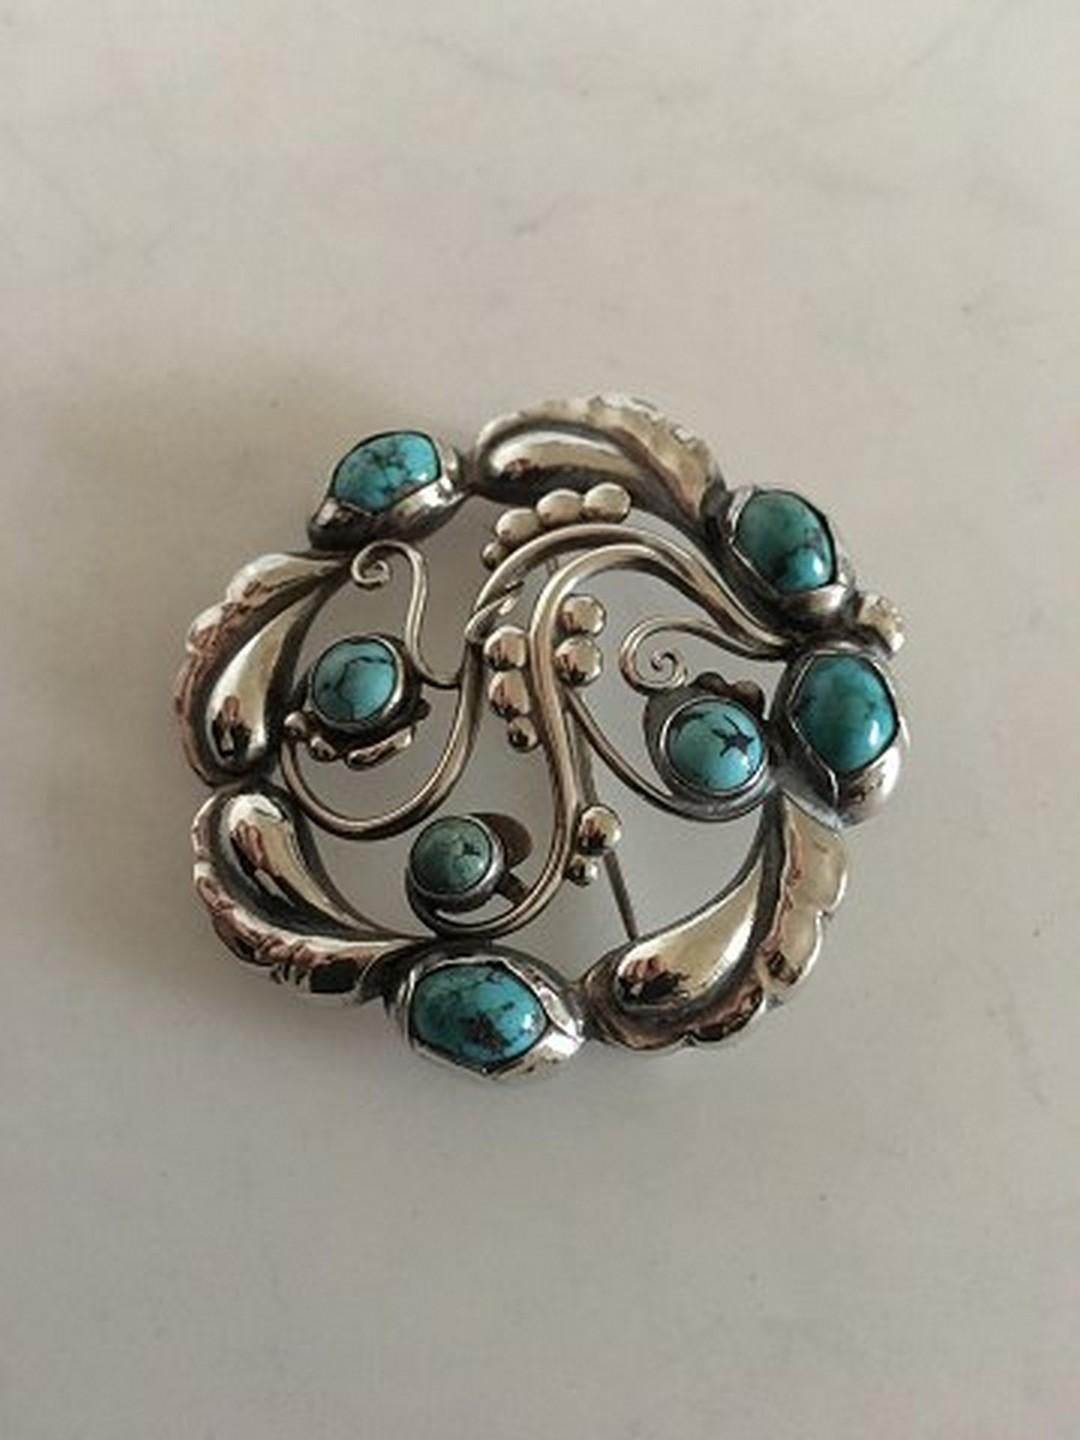 Georg Jensen Sterling Silver Brooch No 159 ornamented with Turquoise. Measures 4.6 cm / 1 13/16 in. diameter. Weighs 17 g / 0.60 oz. Manufactured after 1945.